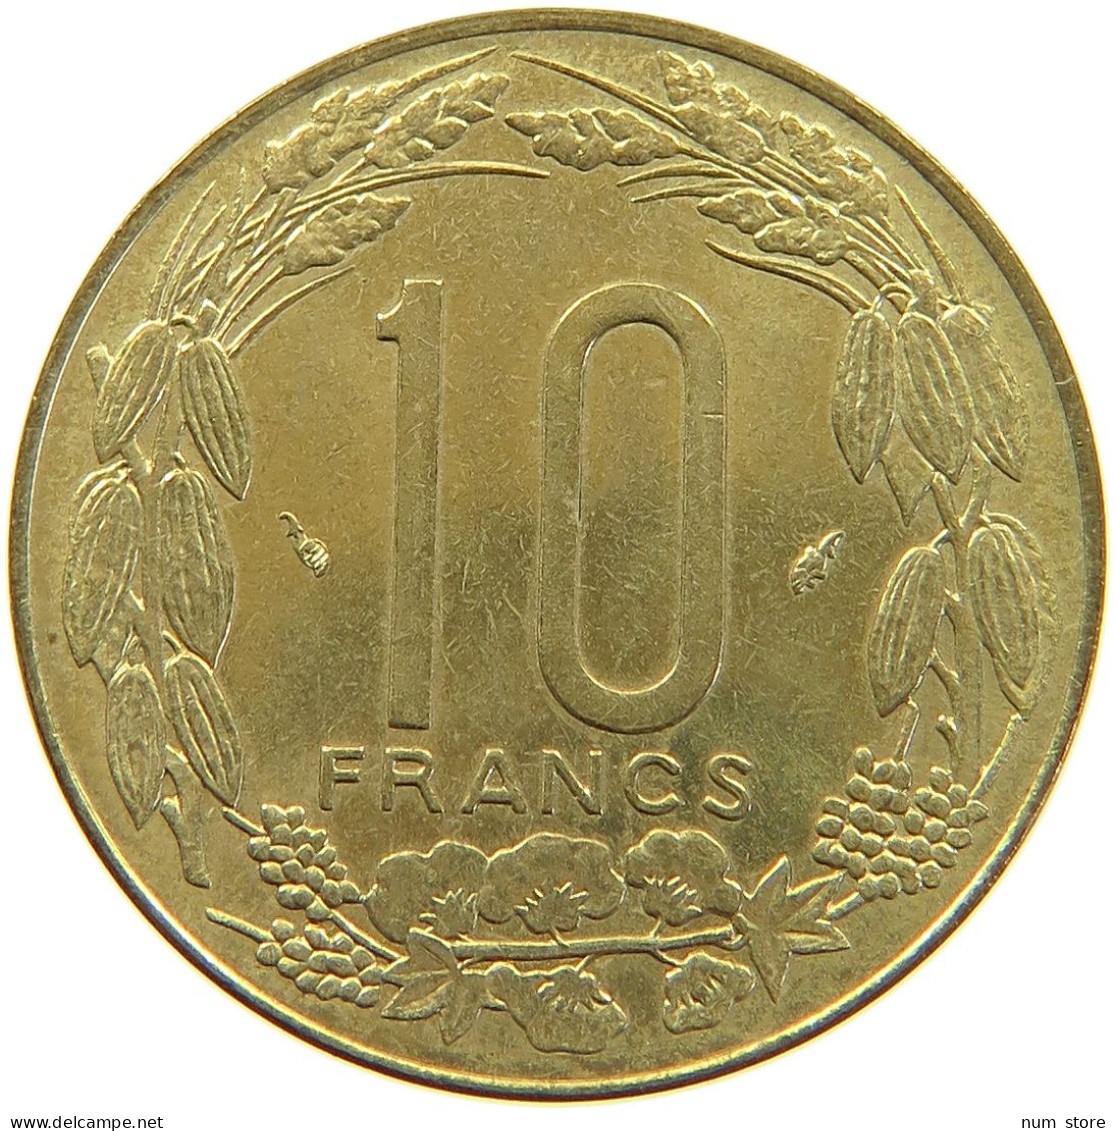 CENTRAL AFRICAN STATES 10 FRANCS 1975  #c016 0107 - Central African Republic